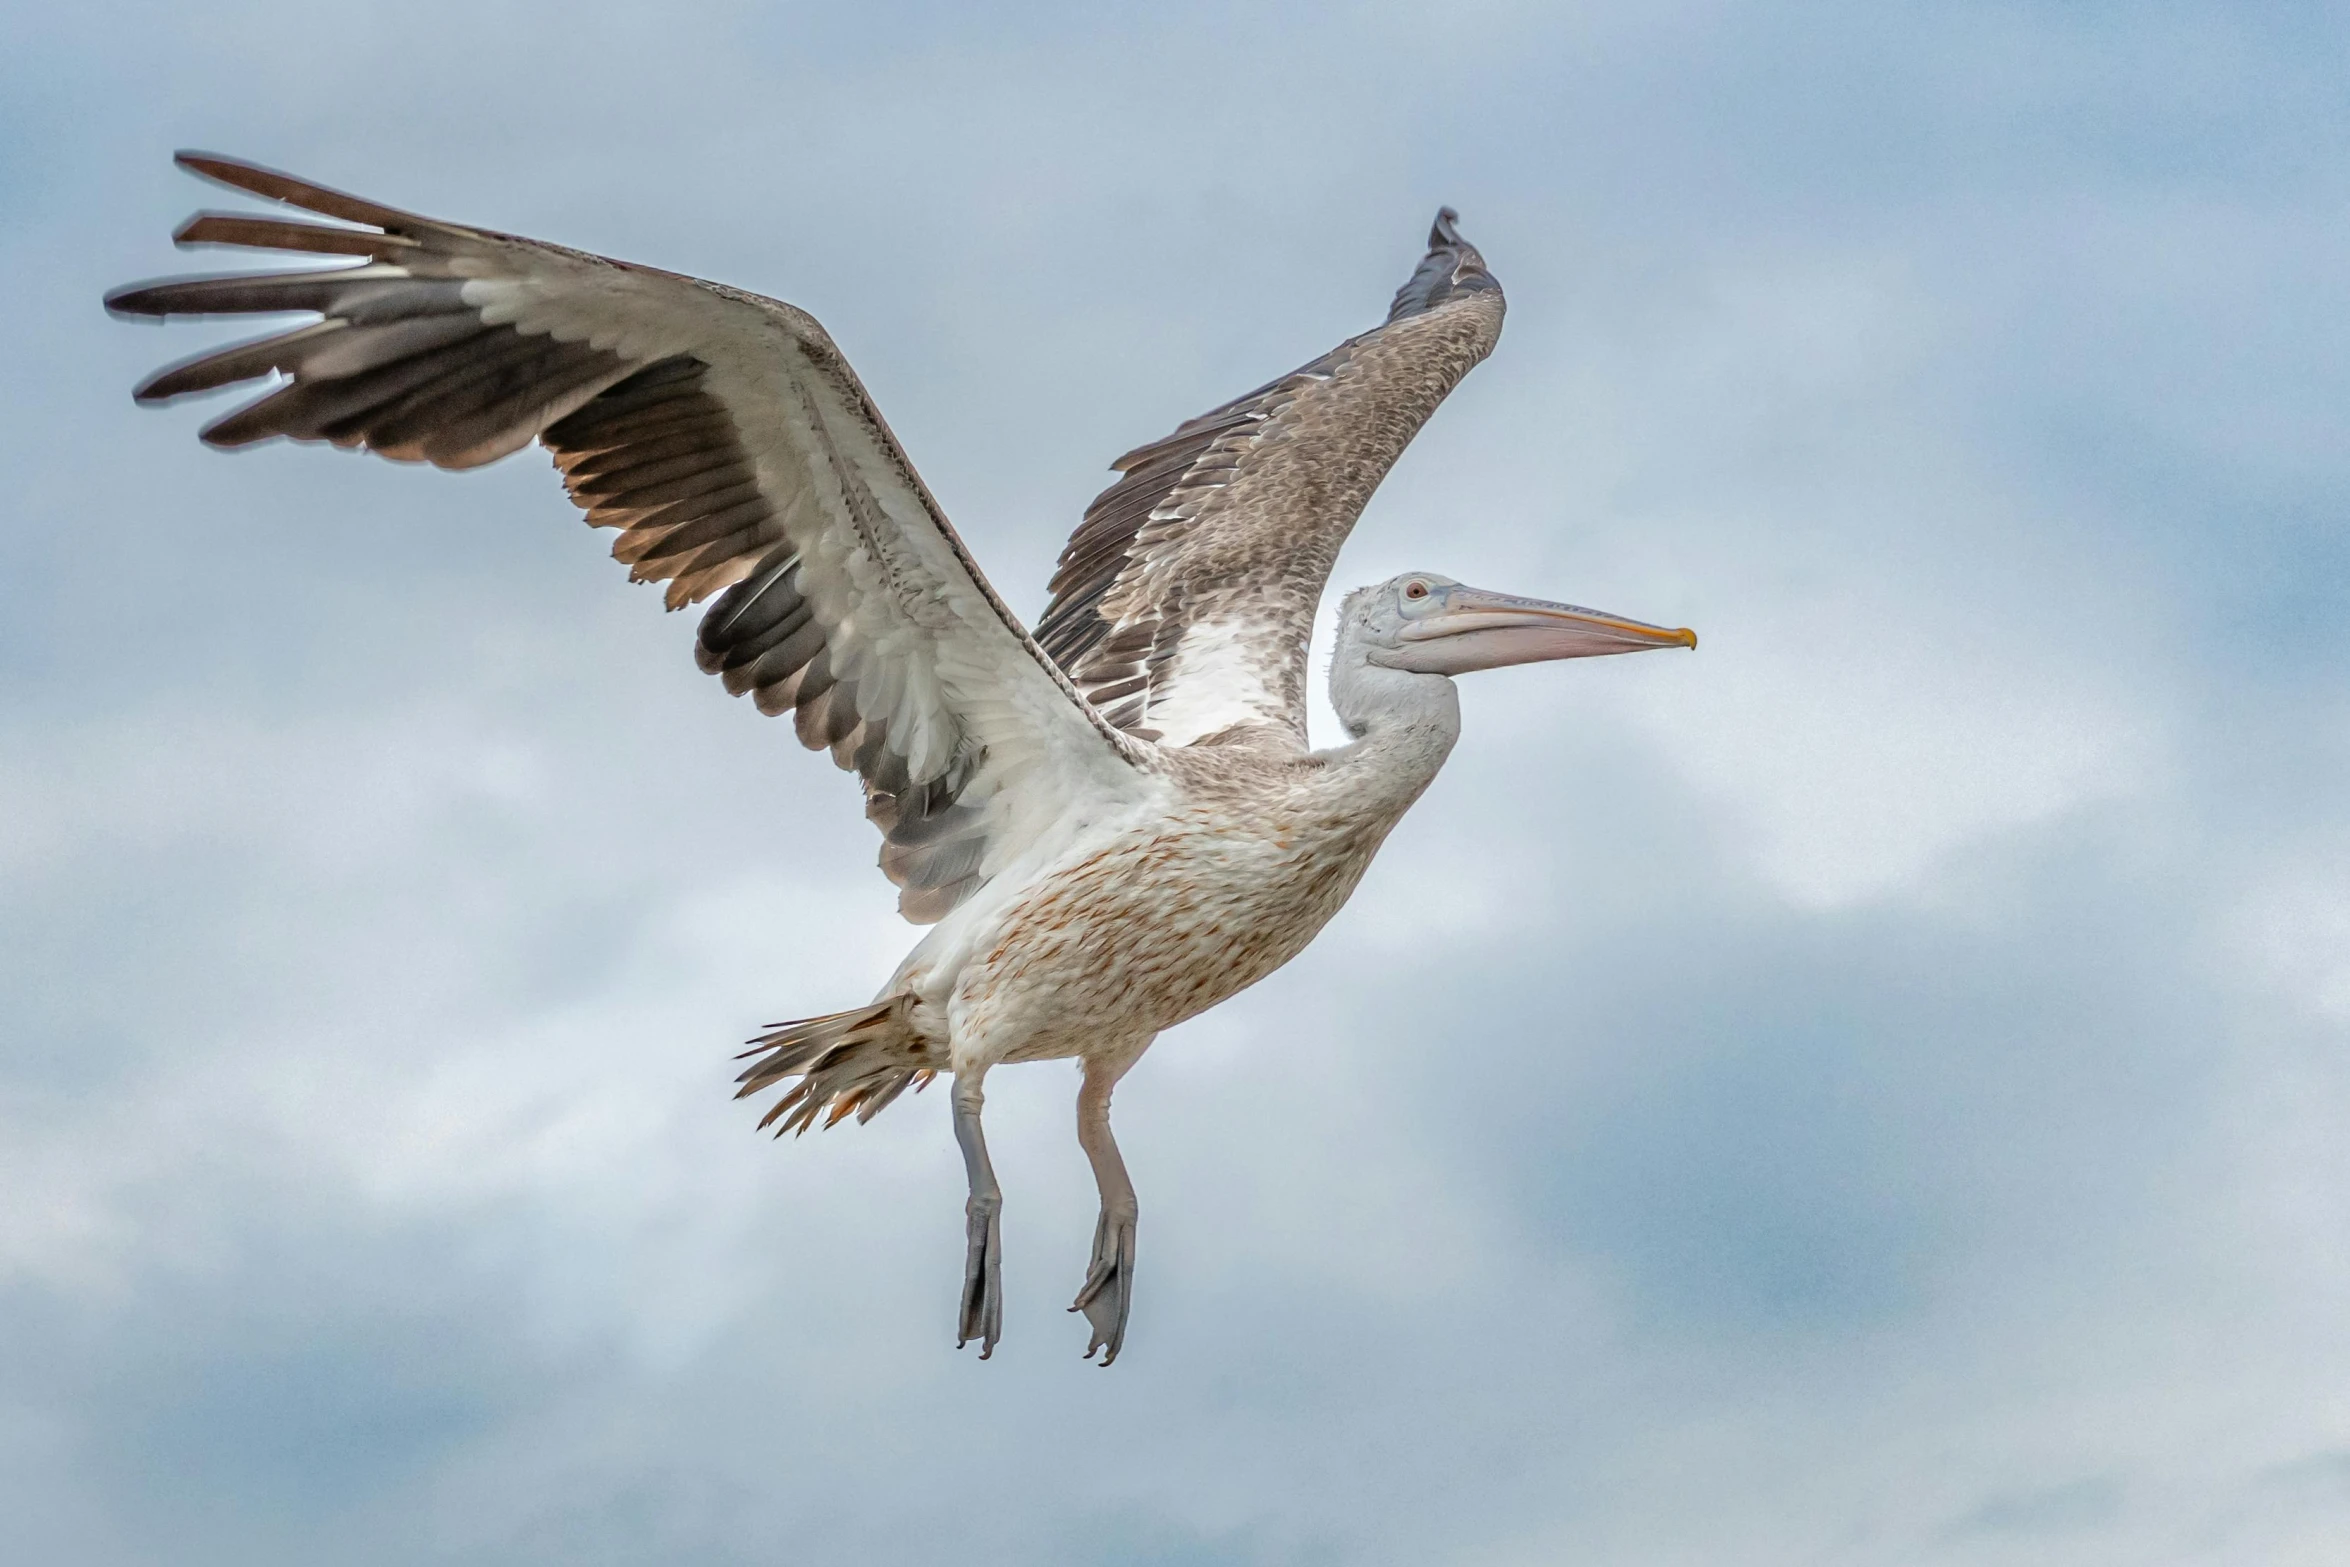 a pelican is soaring through the blue sky with its wings spread